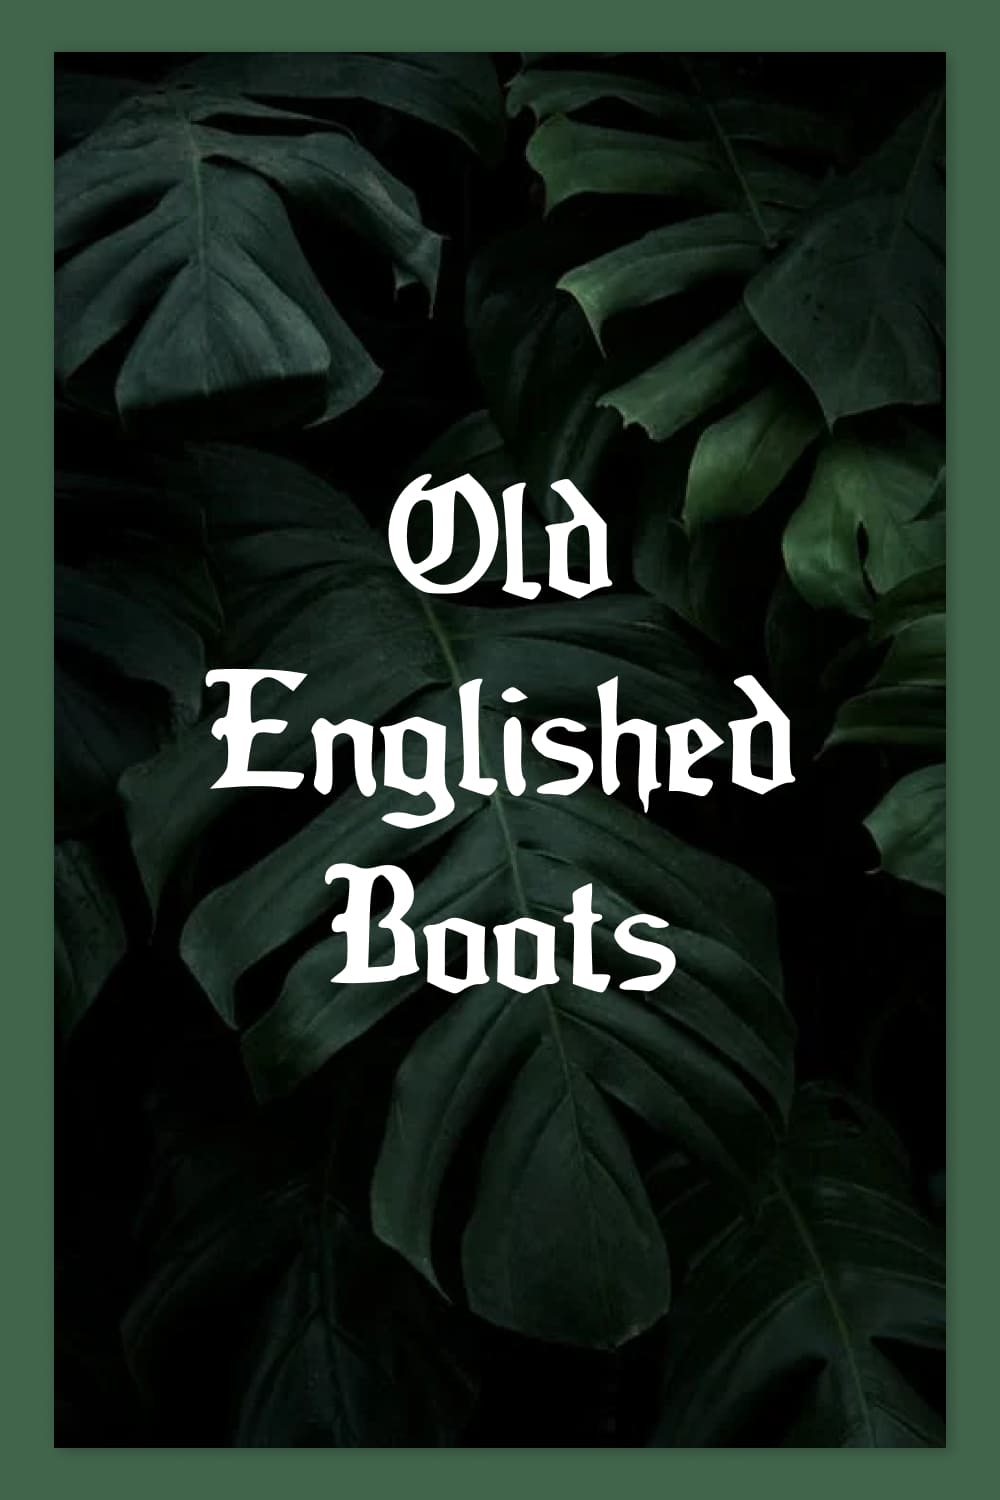 An example of a Old Englished Boots fonts on a background of large green leaves.